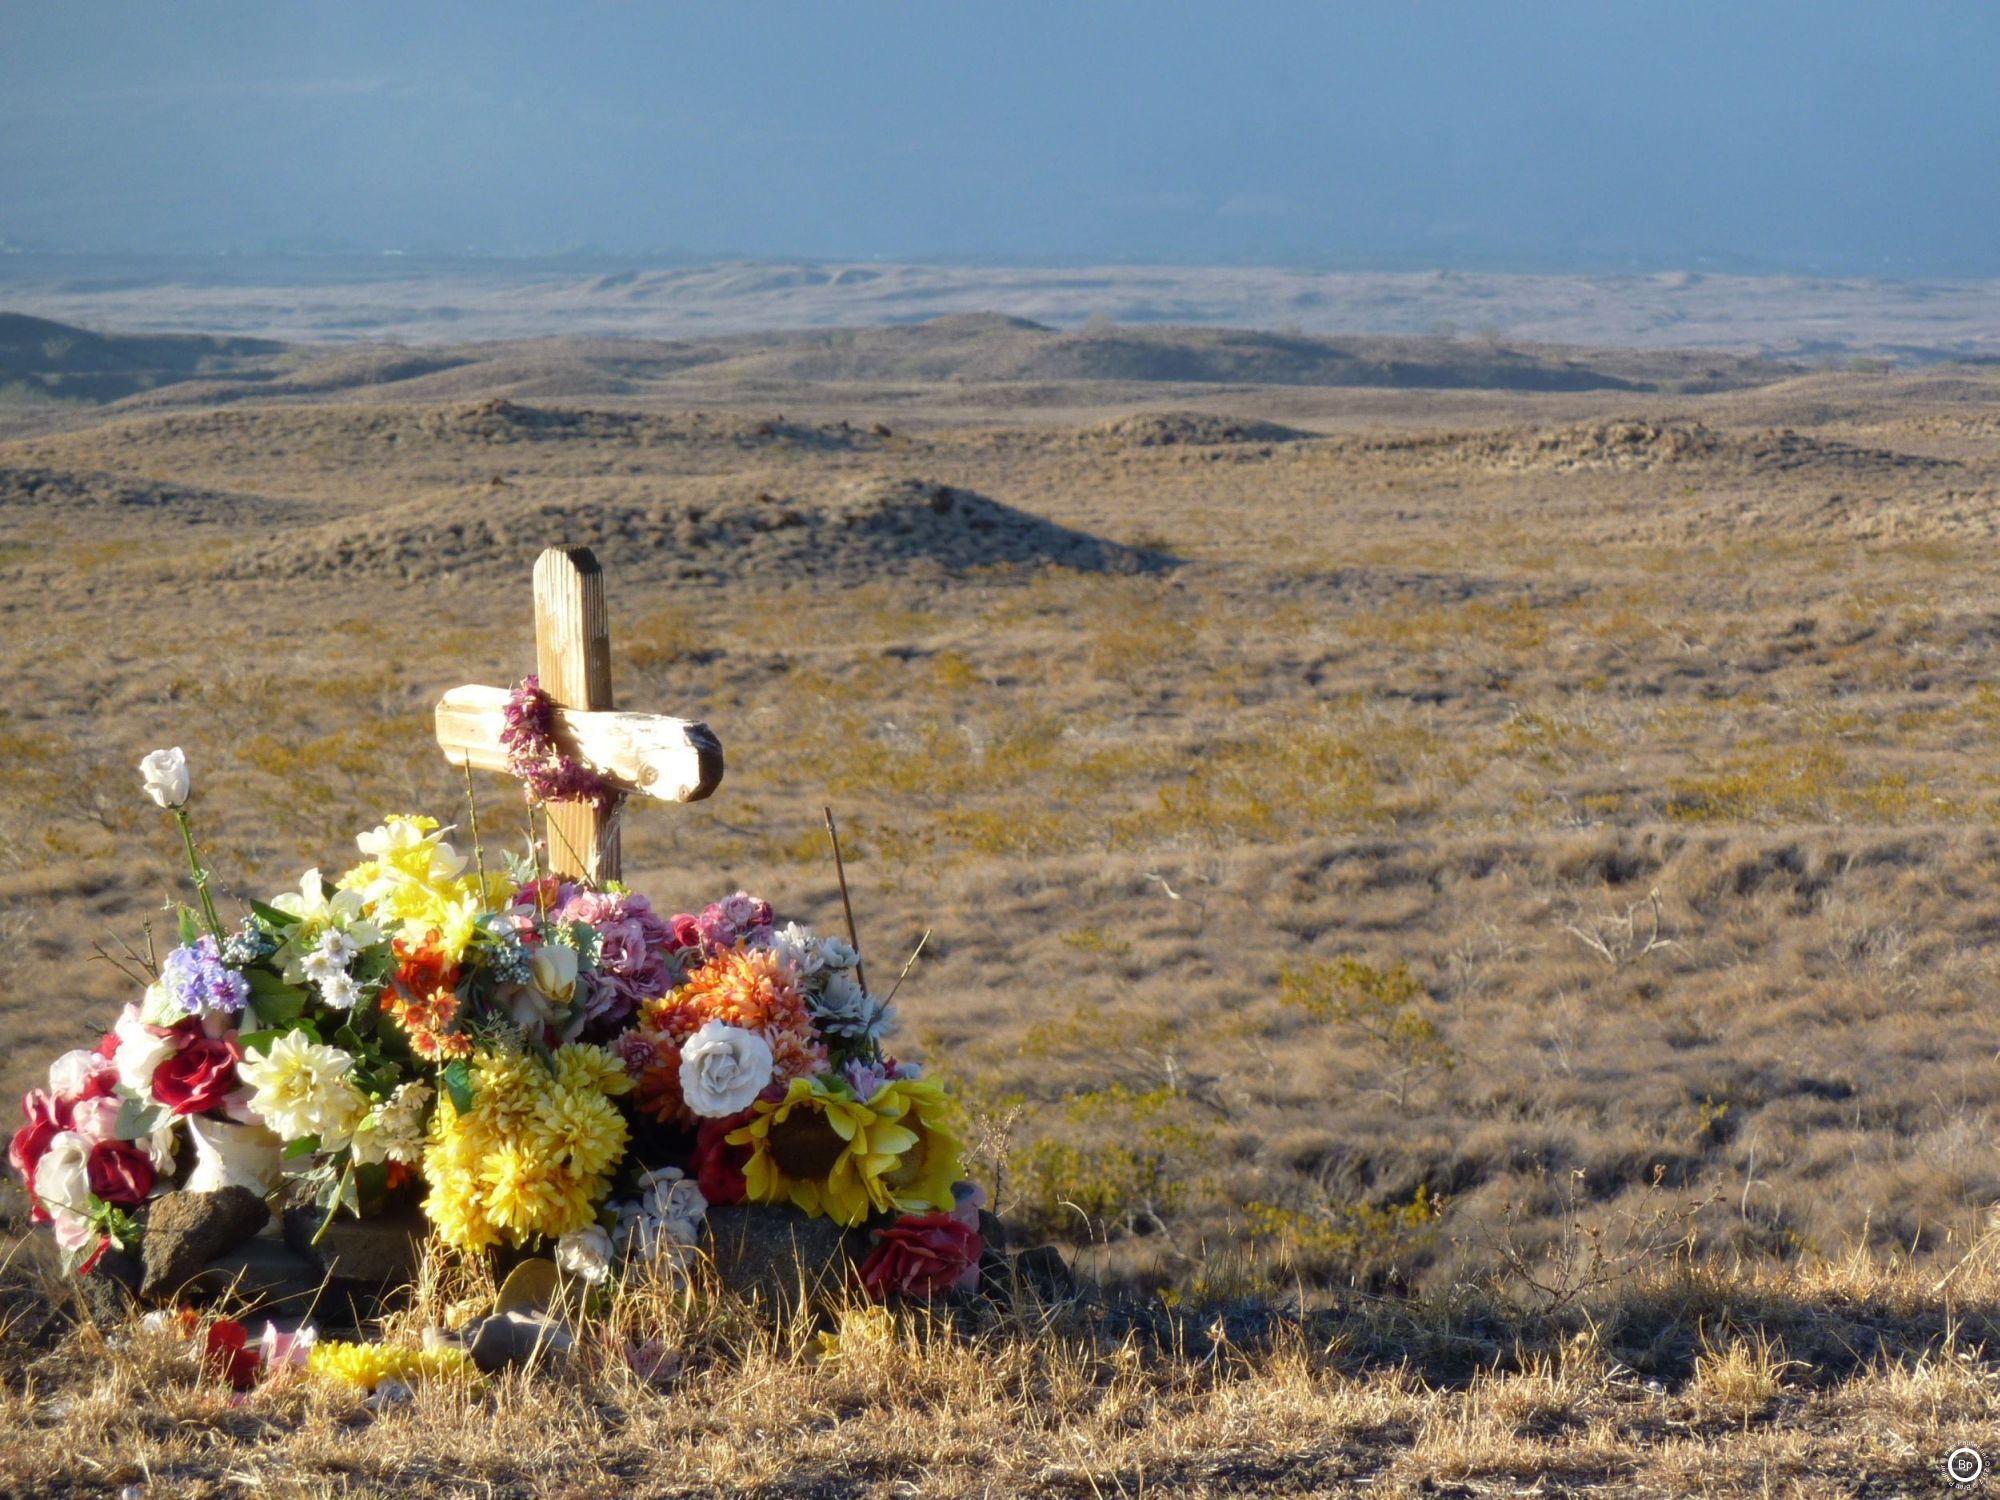 Road Side Shrine to the God Hwy... or a cross and flowers overlooking a vast expanse of open land